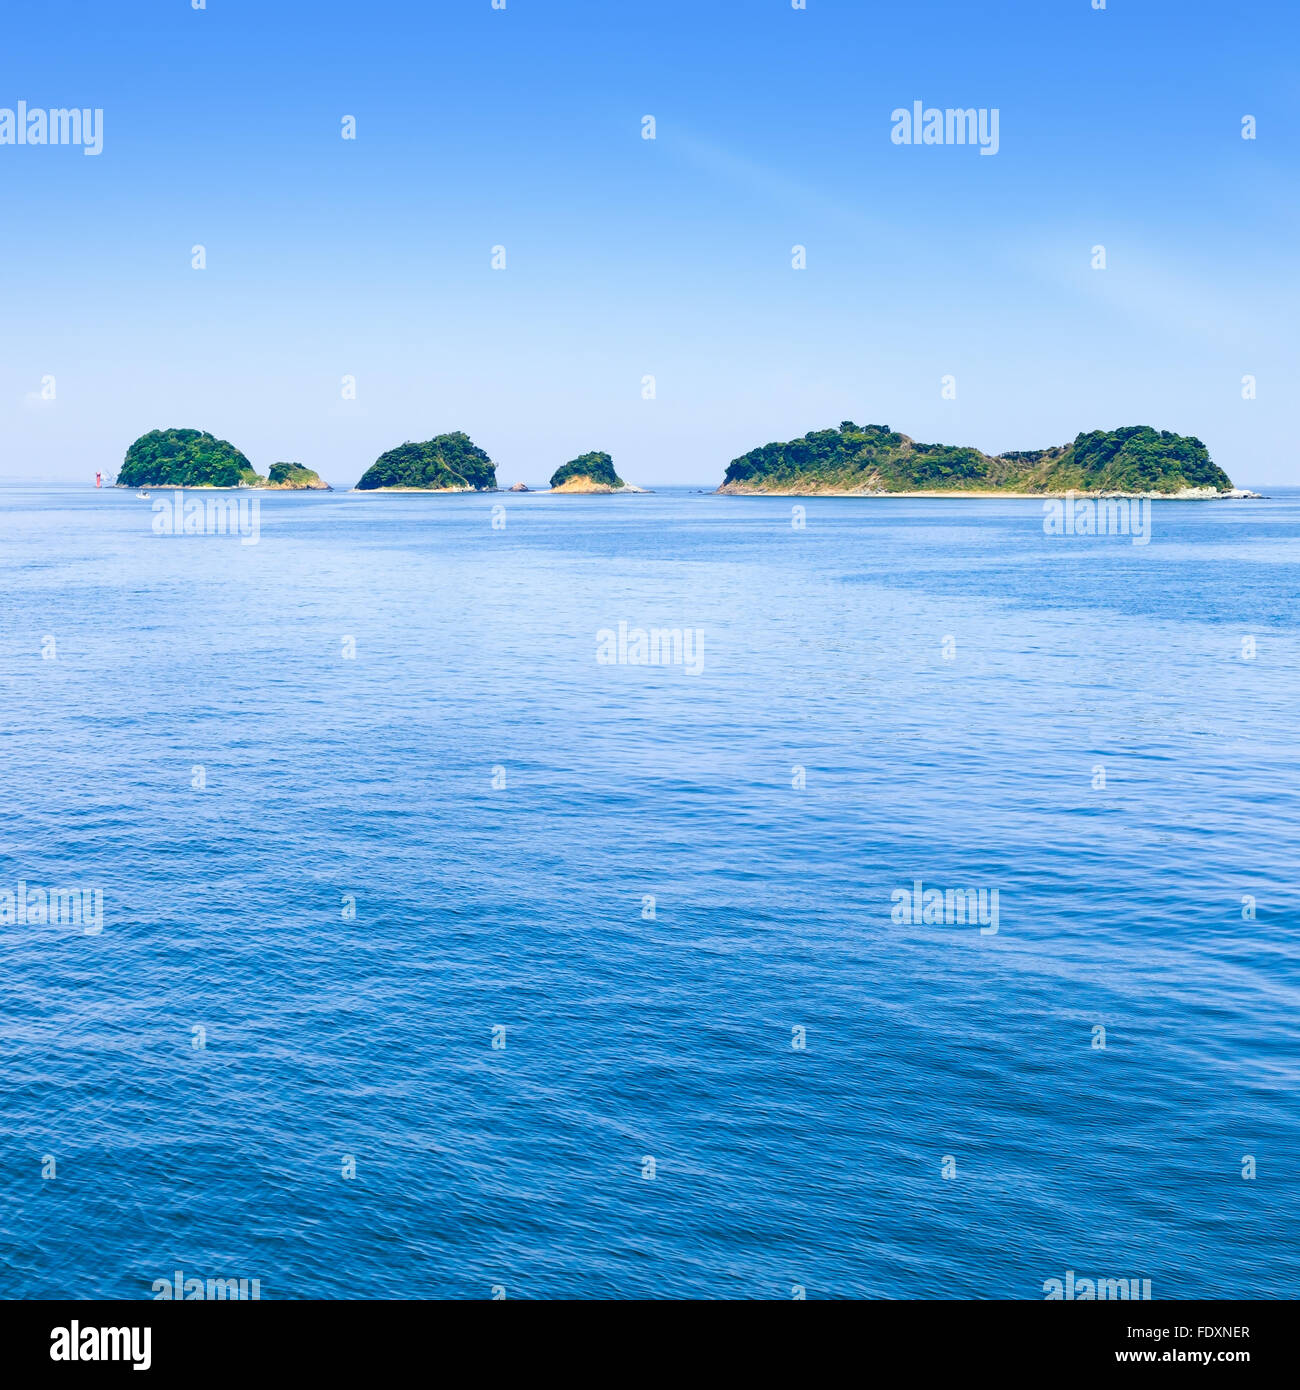 Small island group on sea and blue sky. Toba bay, Japan. Asia. Stock Photo